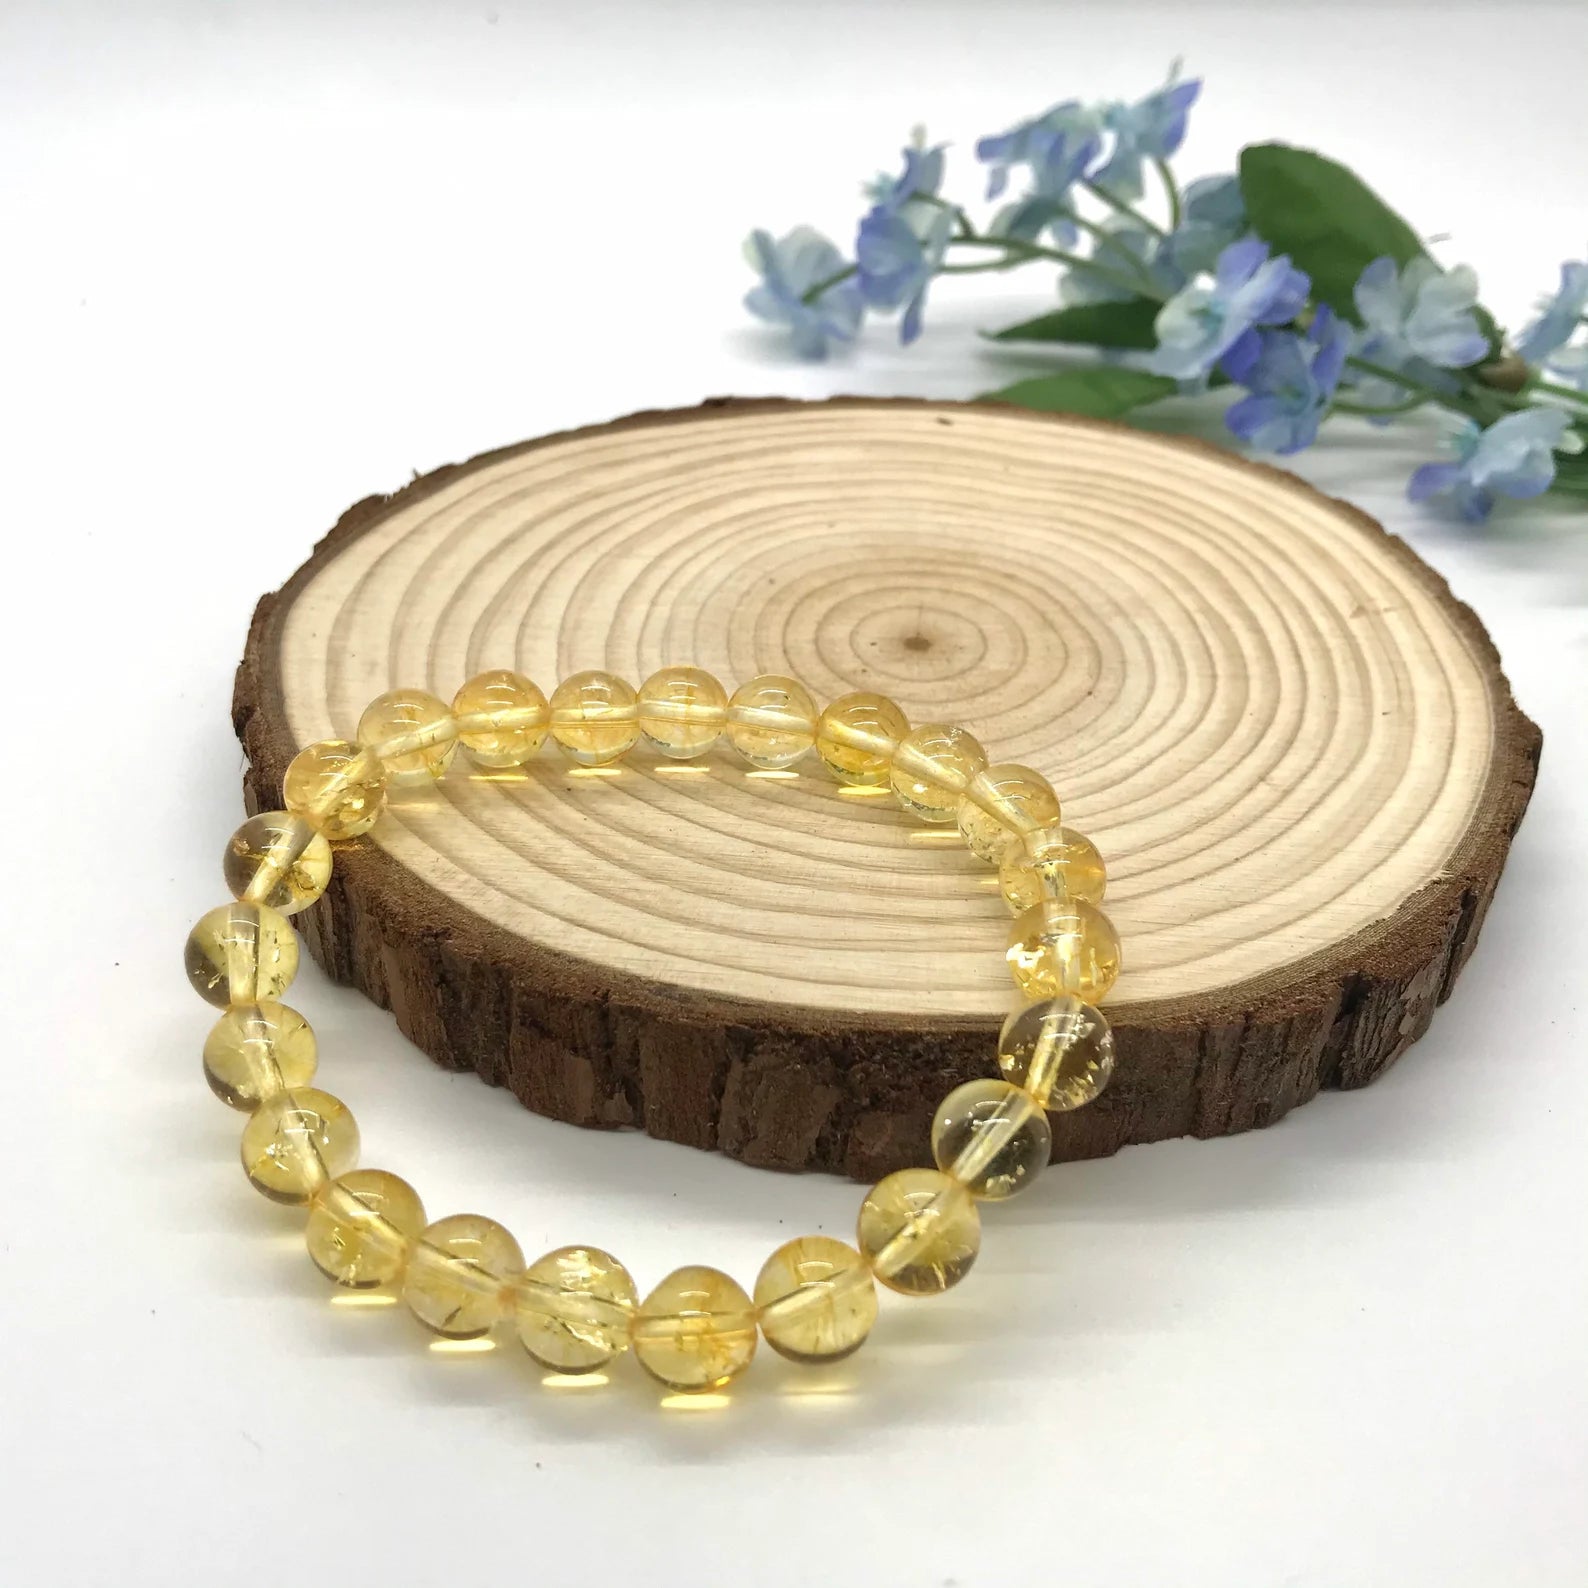 Buy GaiaGems Yellow Citrine Bracelet for Financial Luck for Men's and  Women's and Boys and Girls (Beads Size: 8mm, Jute Bag) at Amazon.in